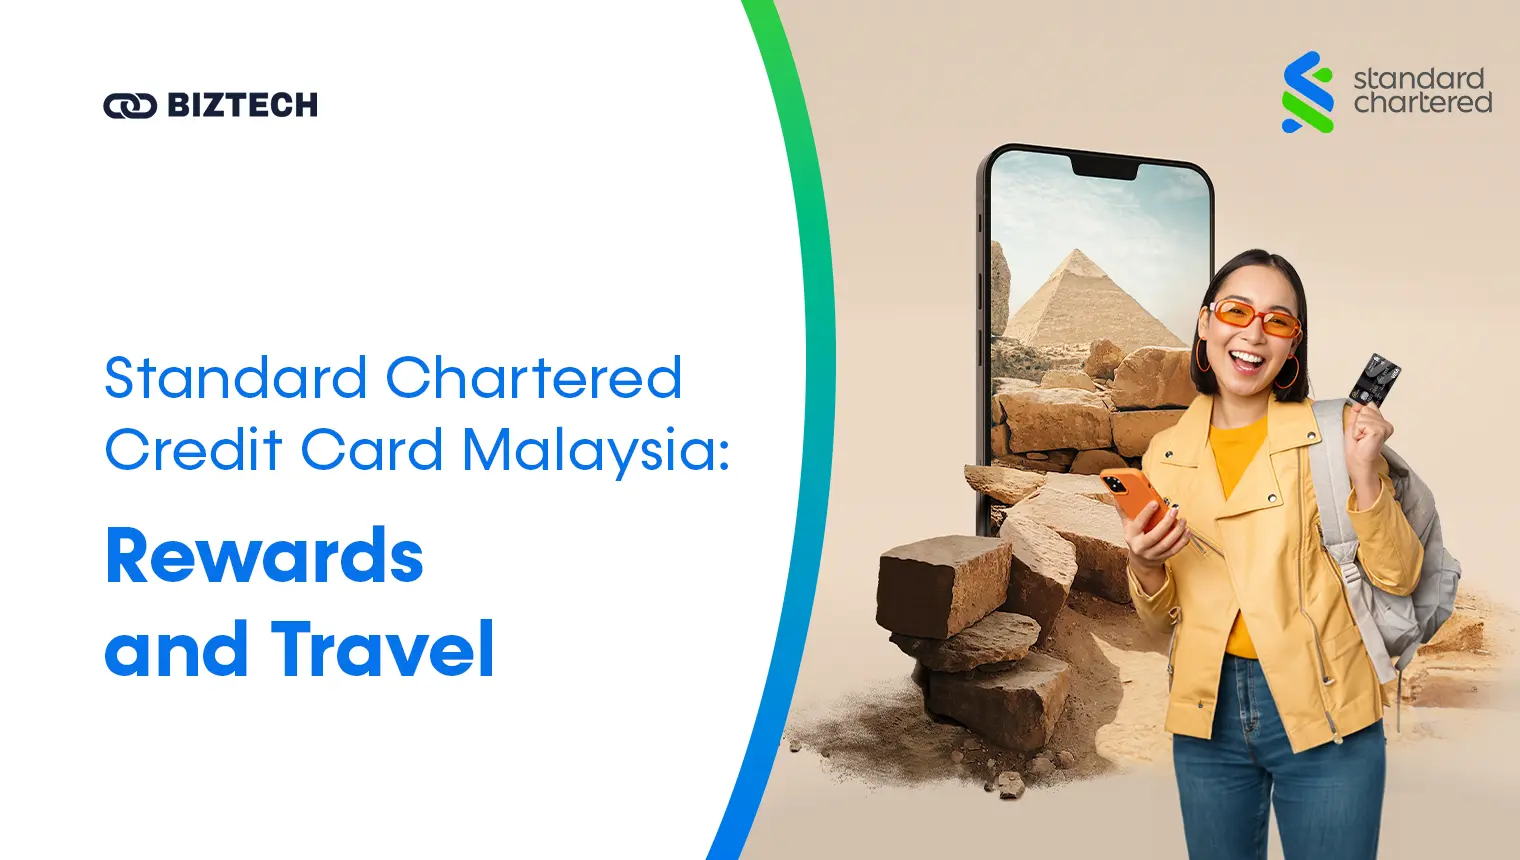 Standard Chartered Credit Card Malaysia Rewards and Travel